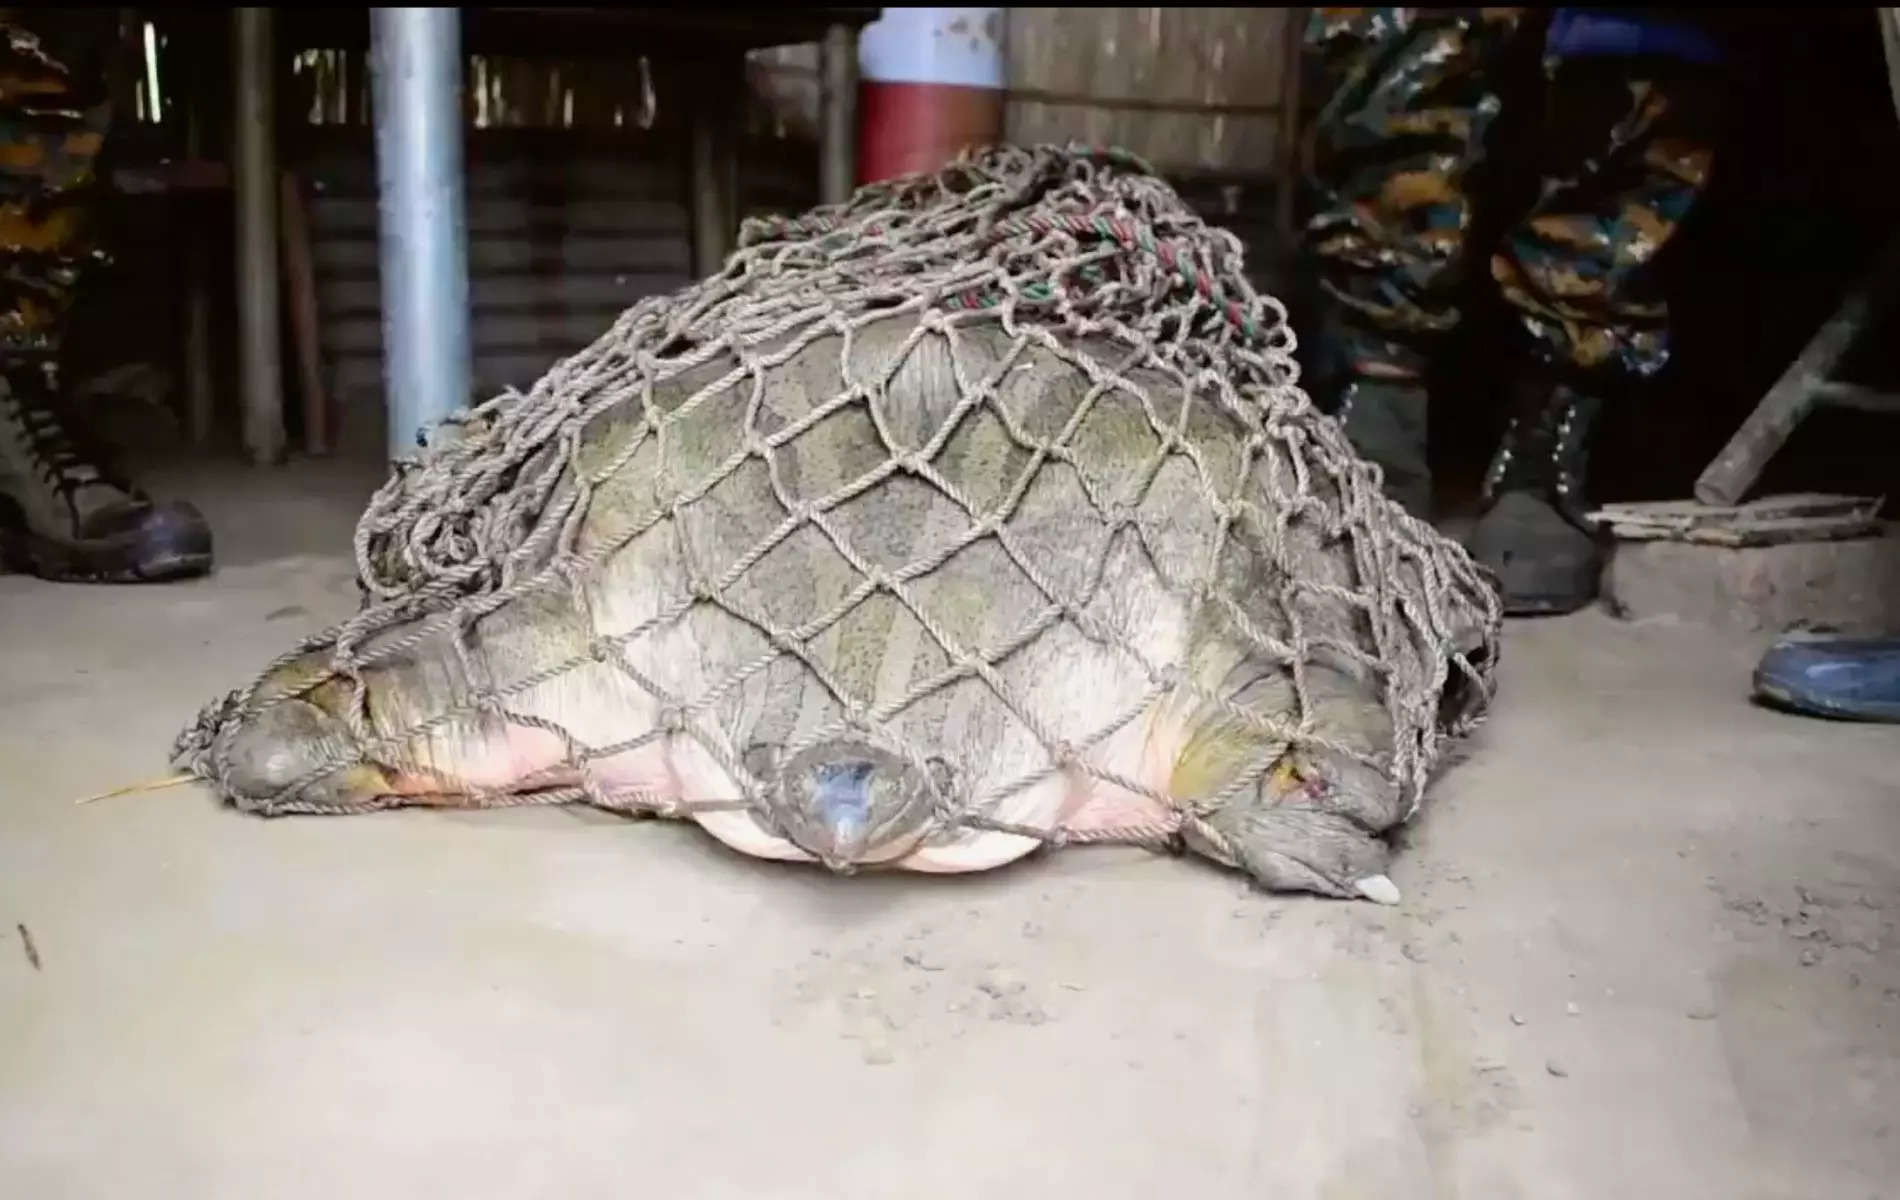 Rescuers treated the wounds of the massive deepwater turtle and managed a timely rescue